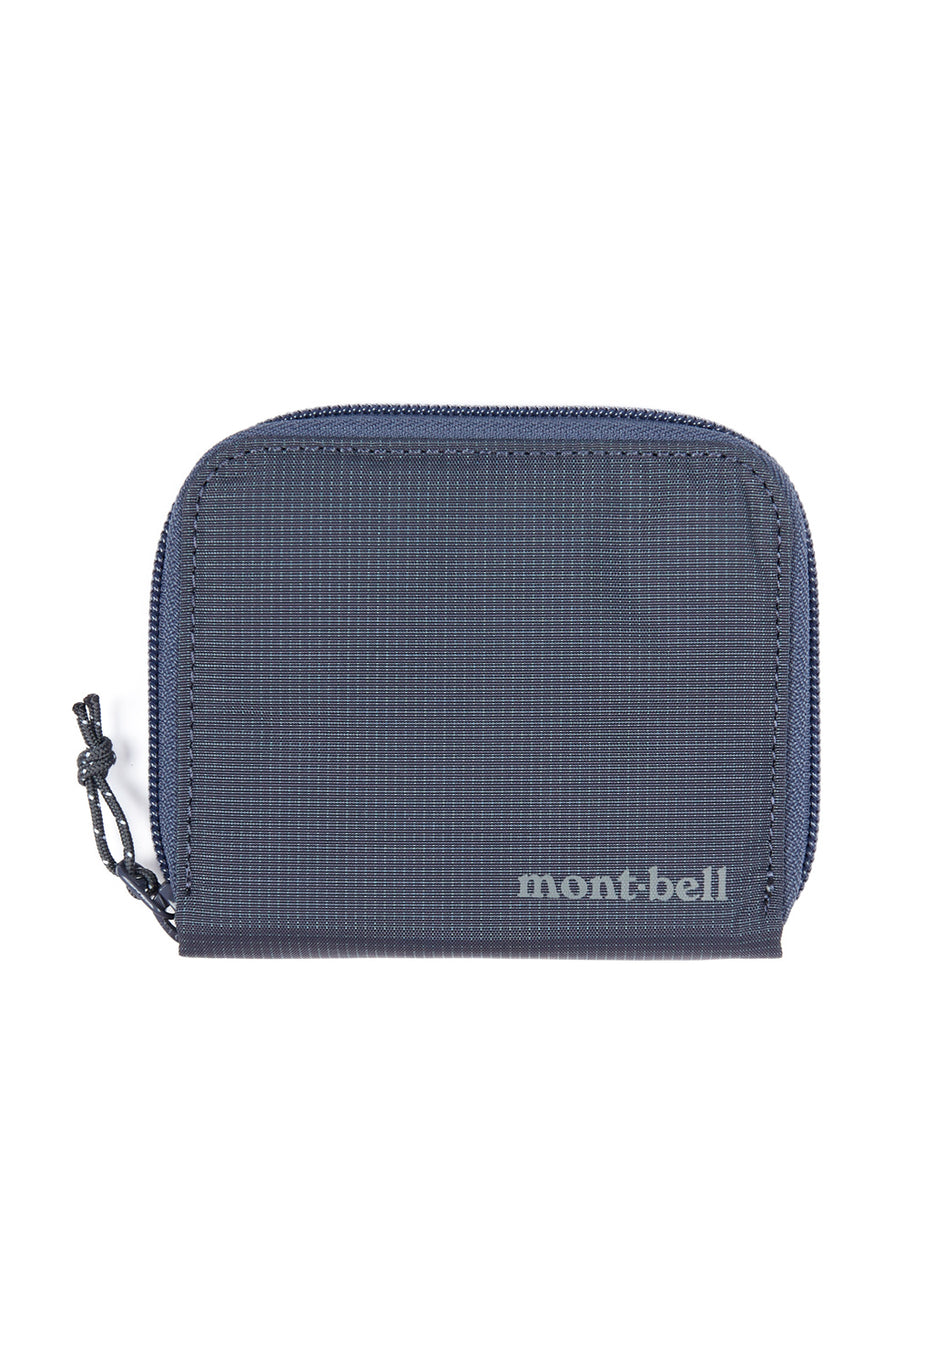 Montbell Zippered Wallet 0